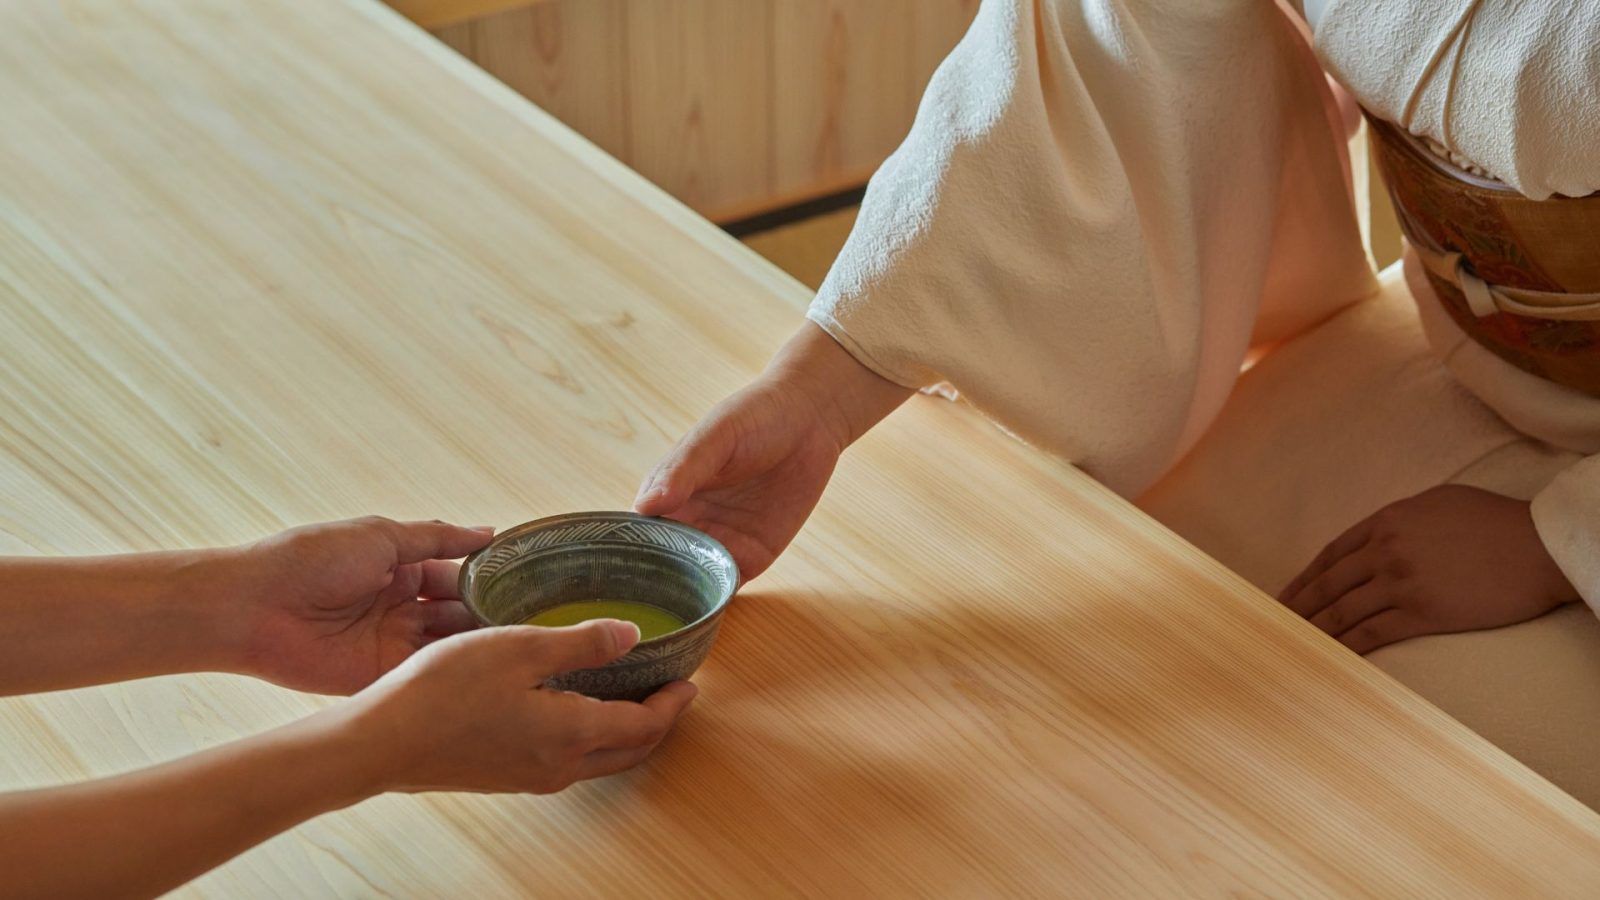 City Escape Cultural Immersion at Dusit Thani Kyoto brings conventional tea experiences to the lodge